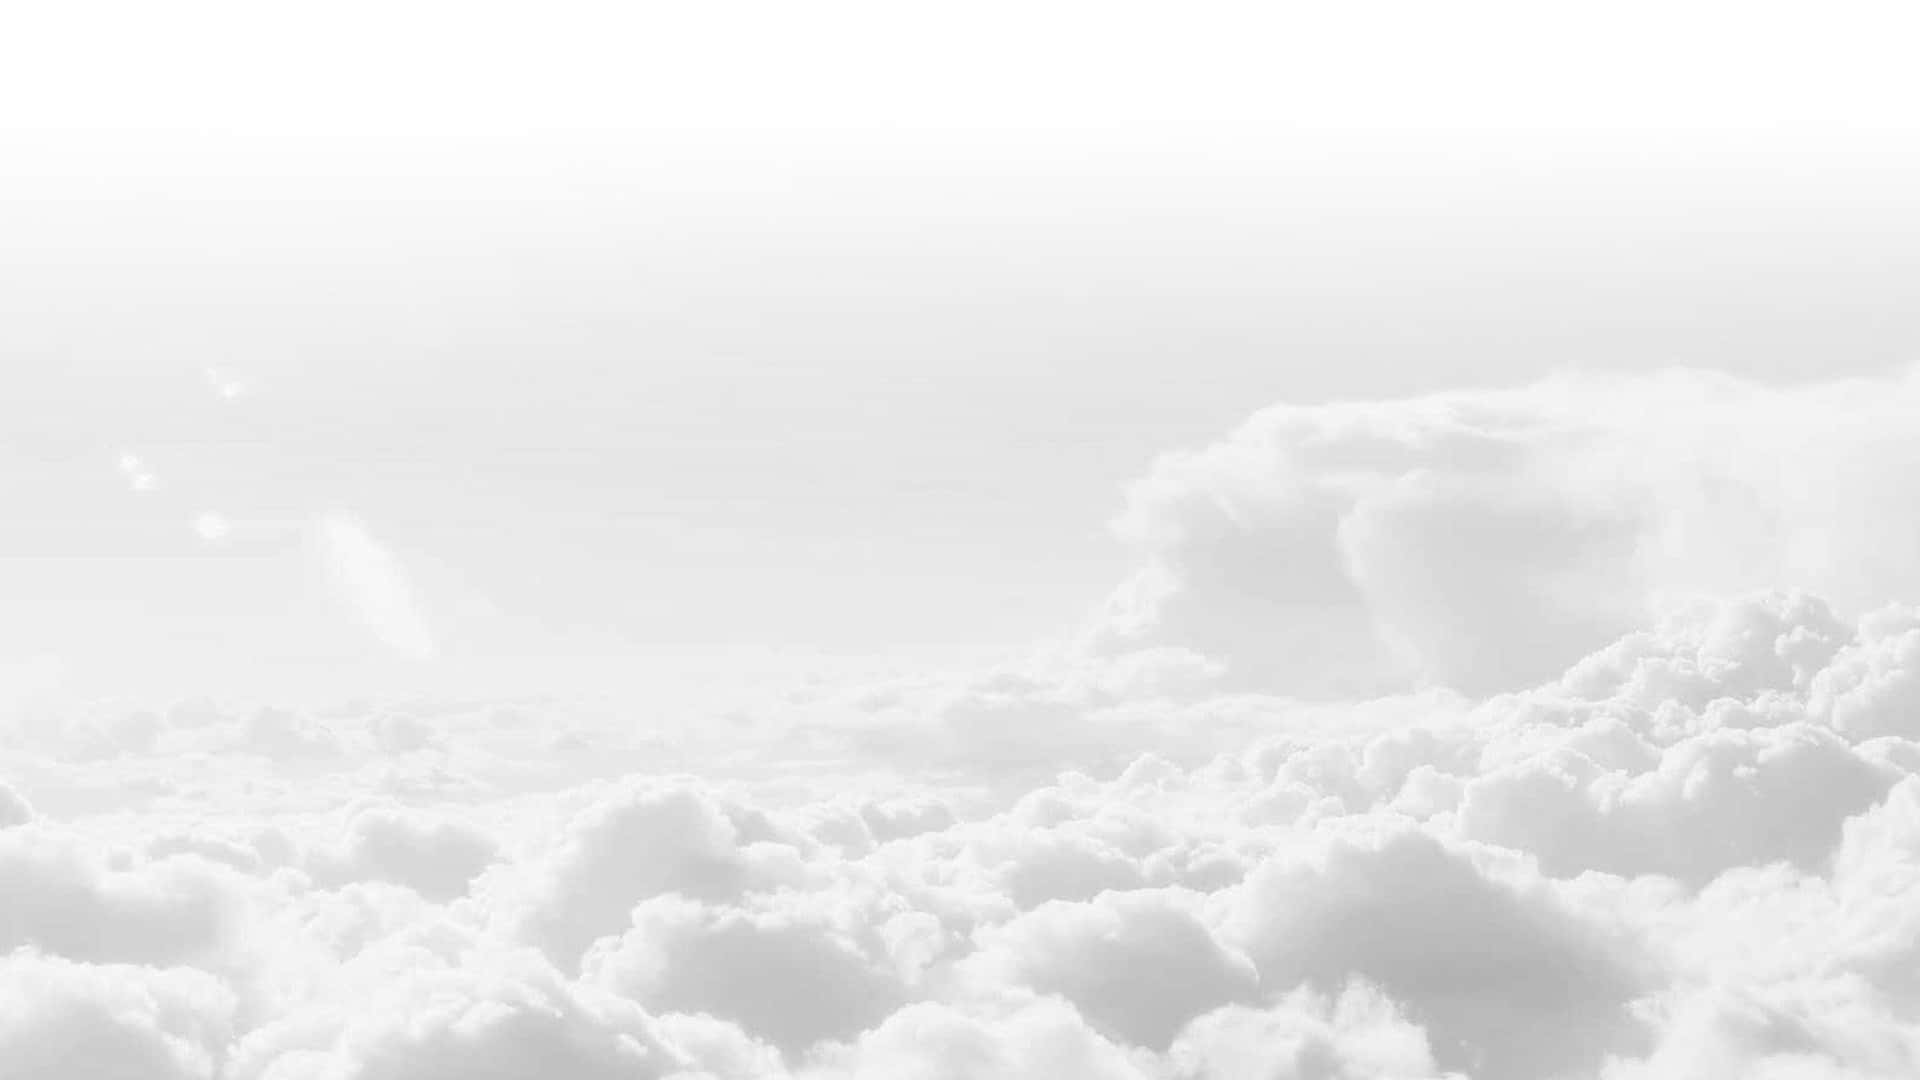 Free White Clouds Wallpaper Downloads, [100+] White Clouds Wallpapers for  FREE 